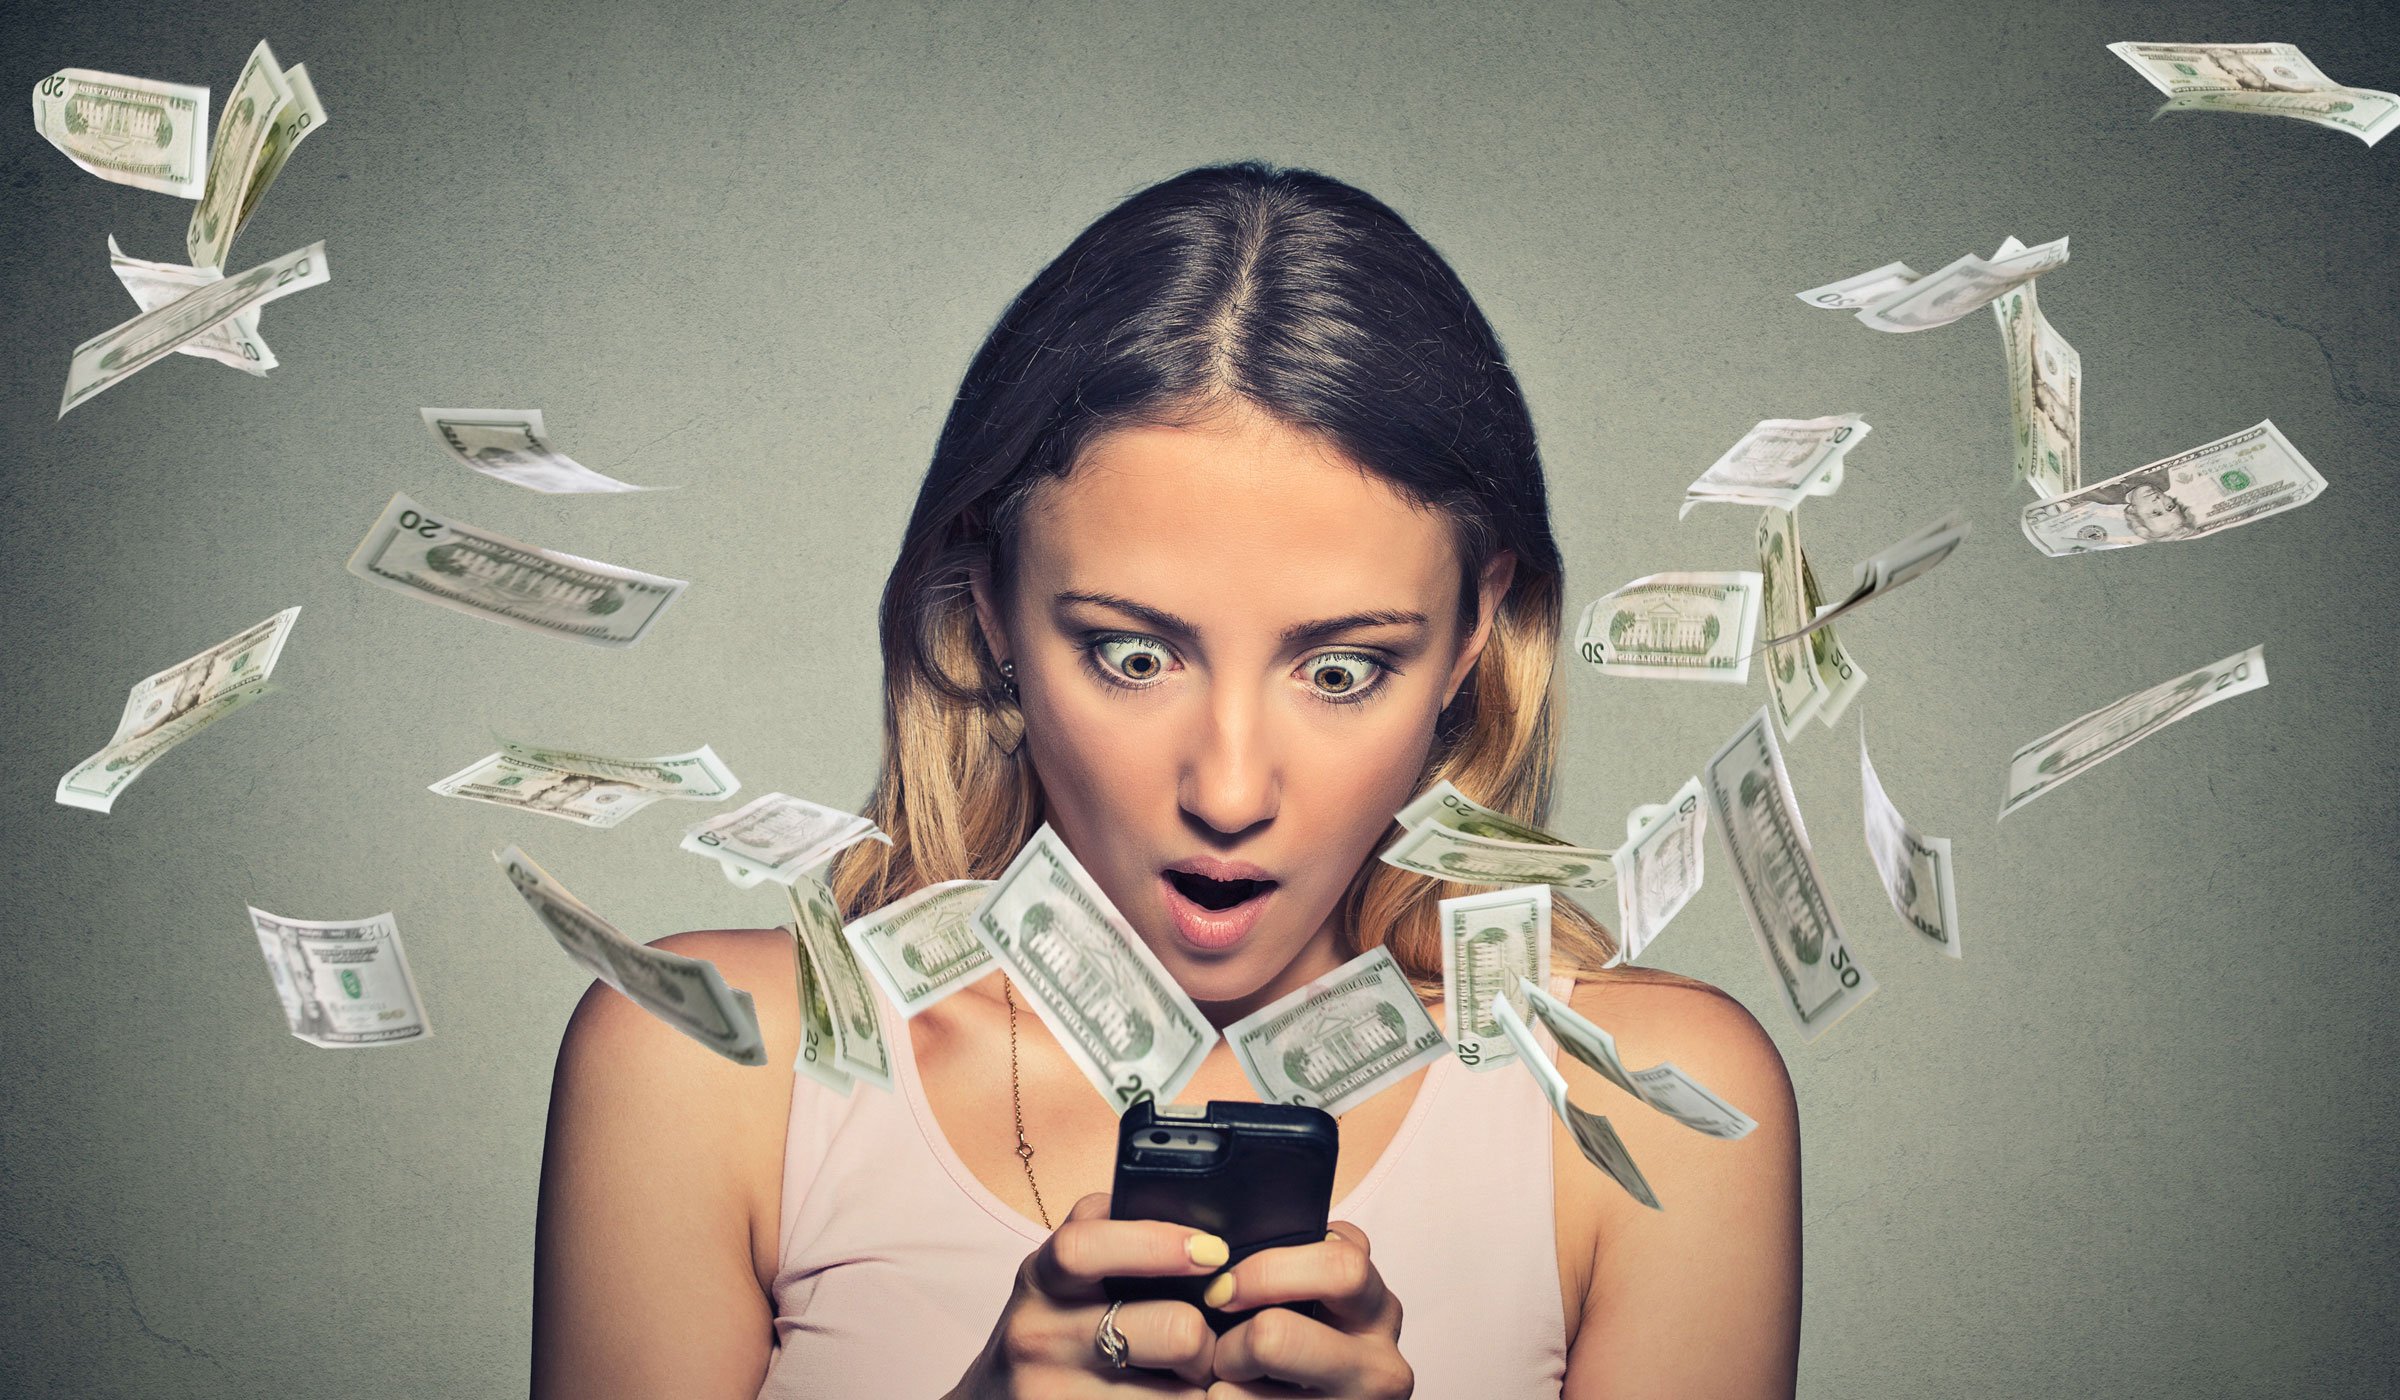 Woman watching her phone in shock as money flies out of it.